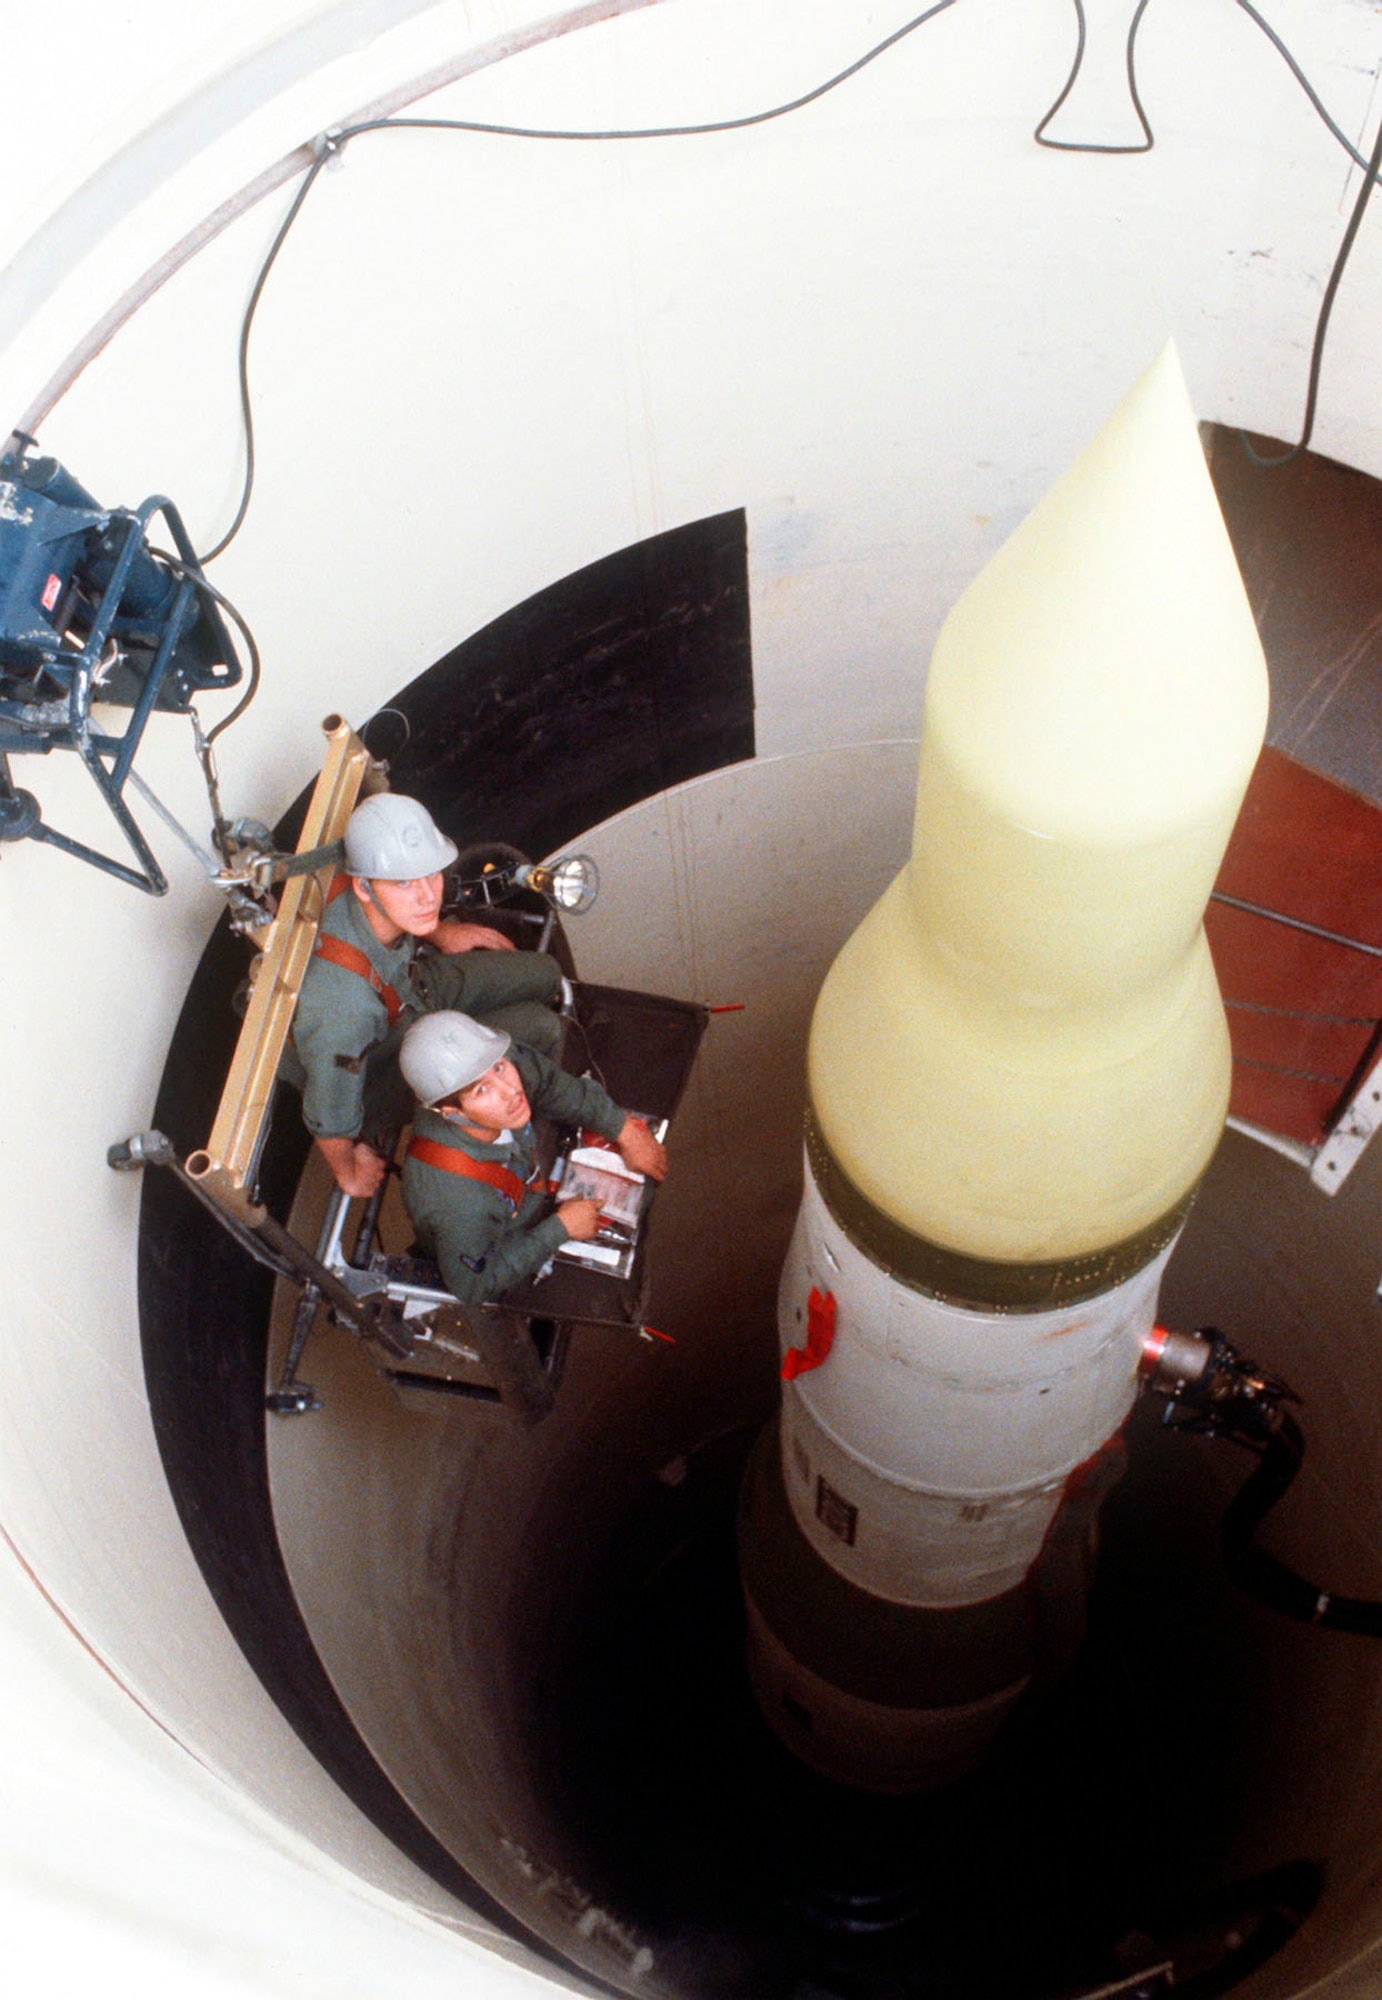 Missile maintainers perform electrical work in a silo at Whiteman AFB, Mo., 1980. (U.S. Air Force photo)